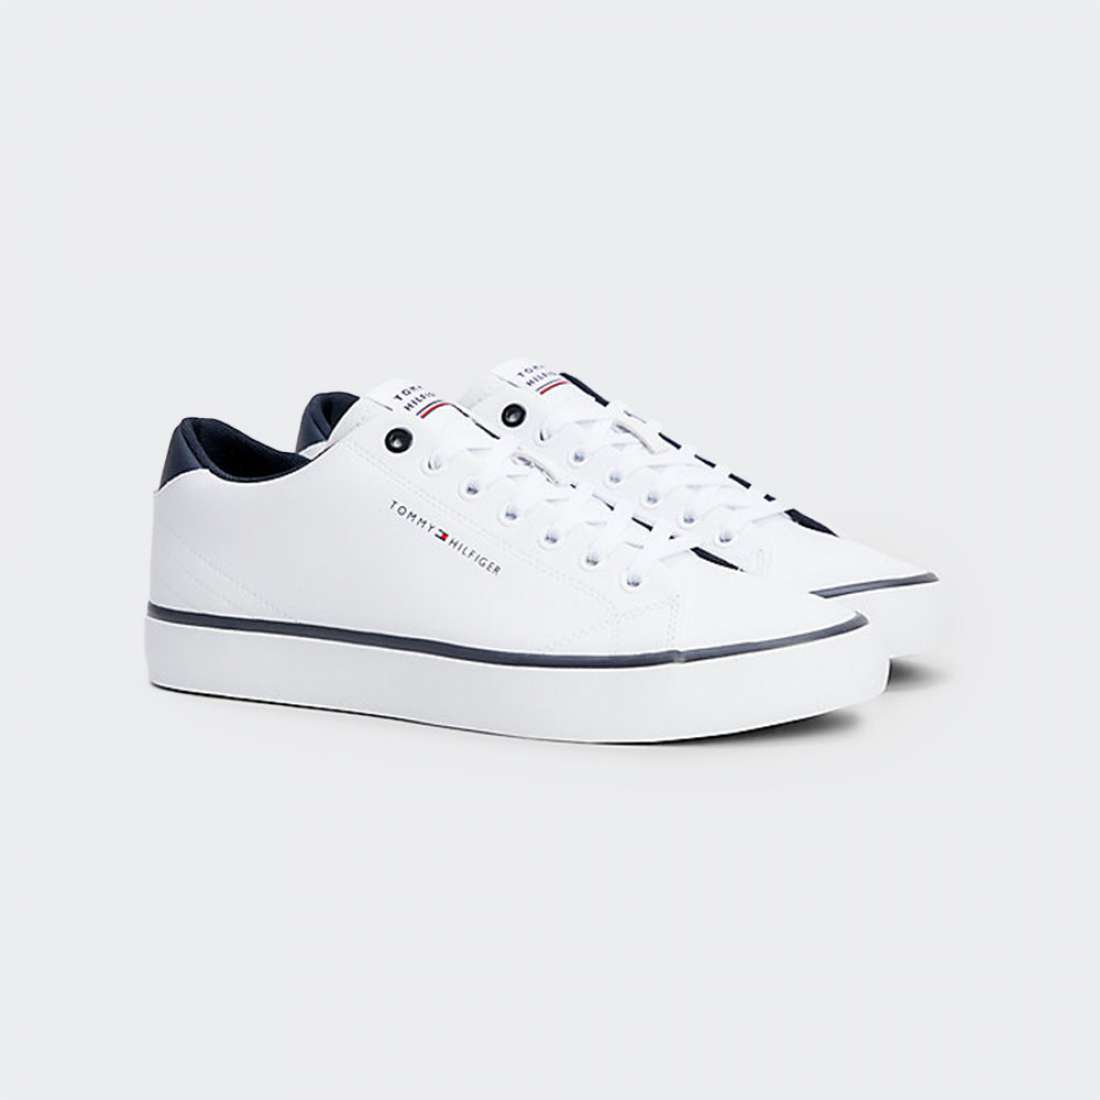 TOMMY HILFIGER LEATHER CONTRAST DETAIL WHITE